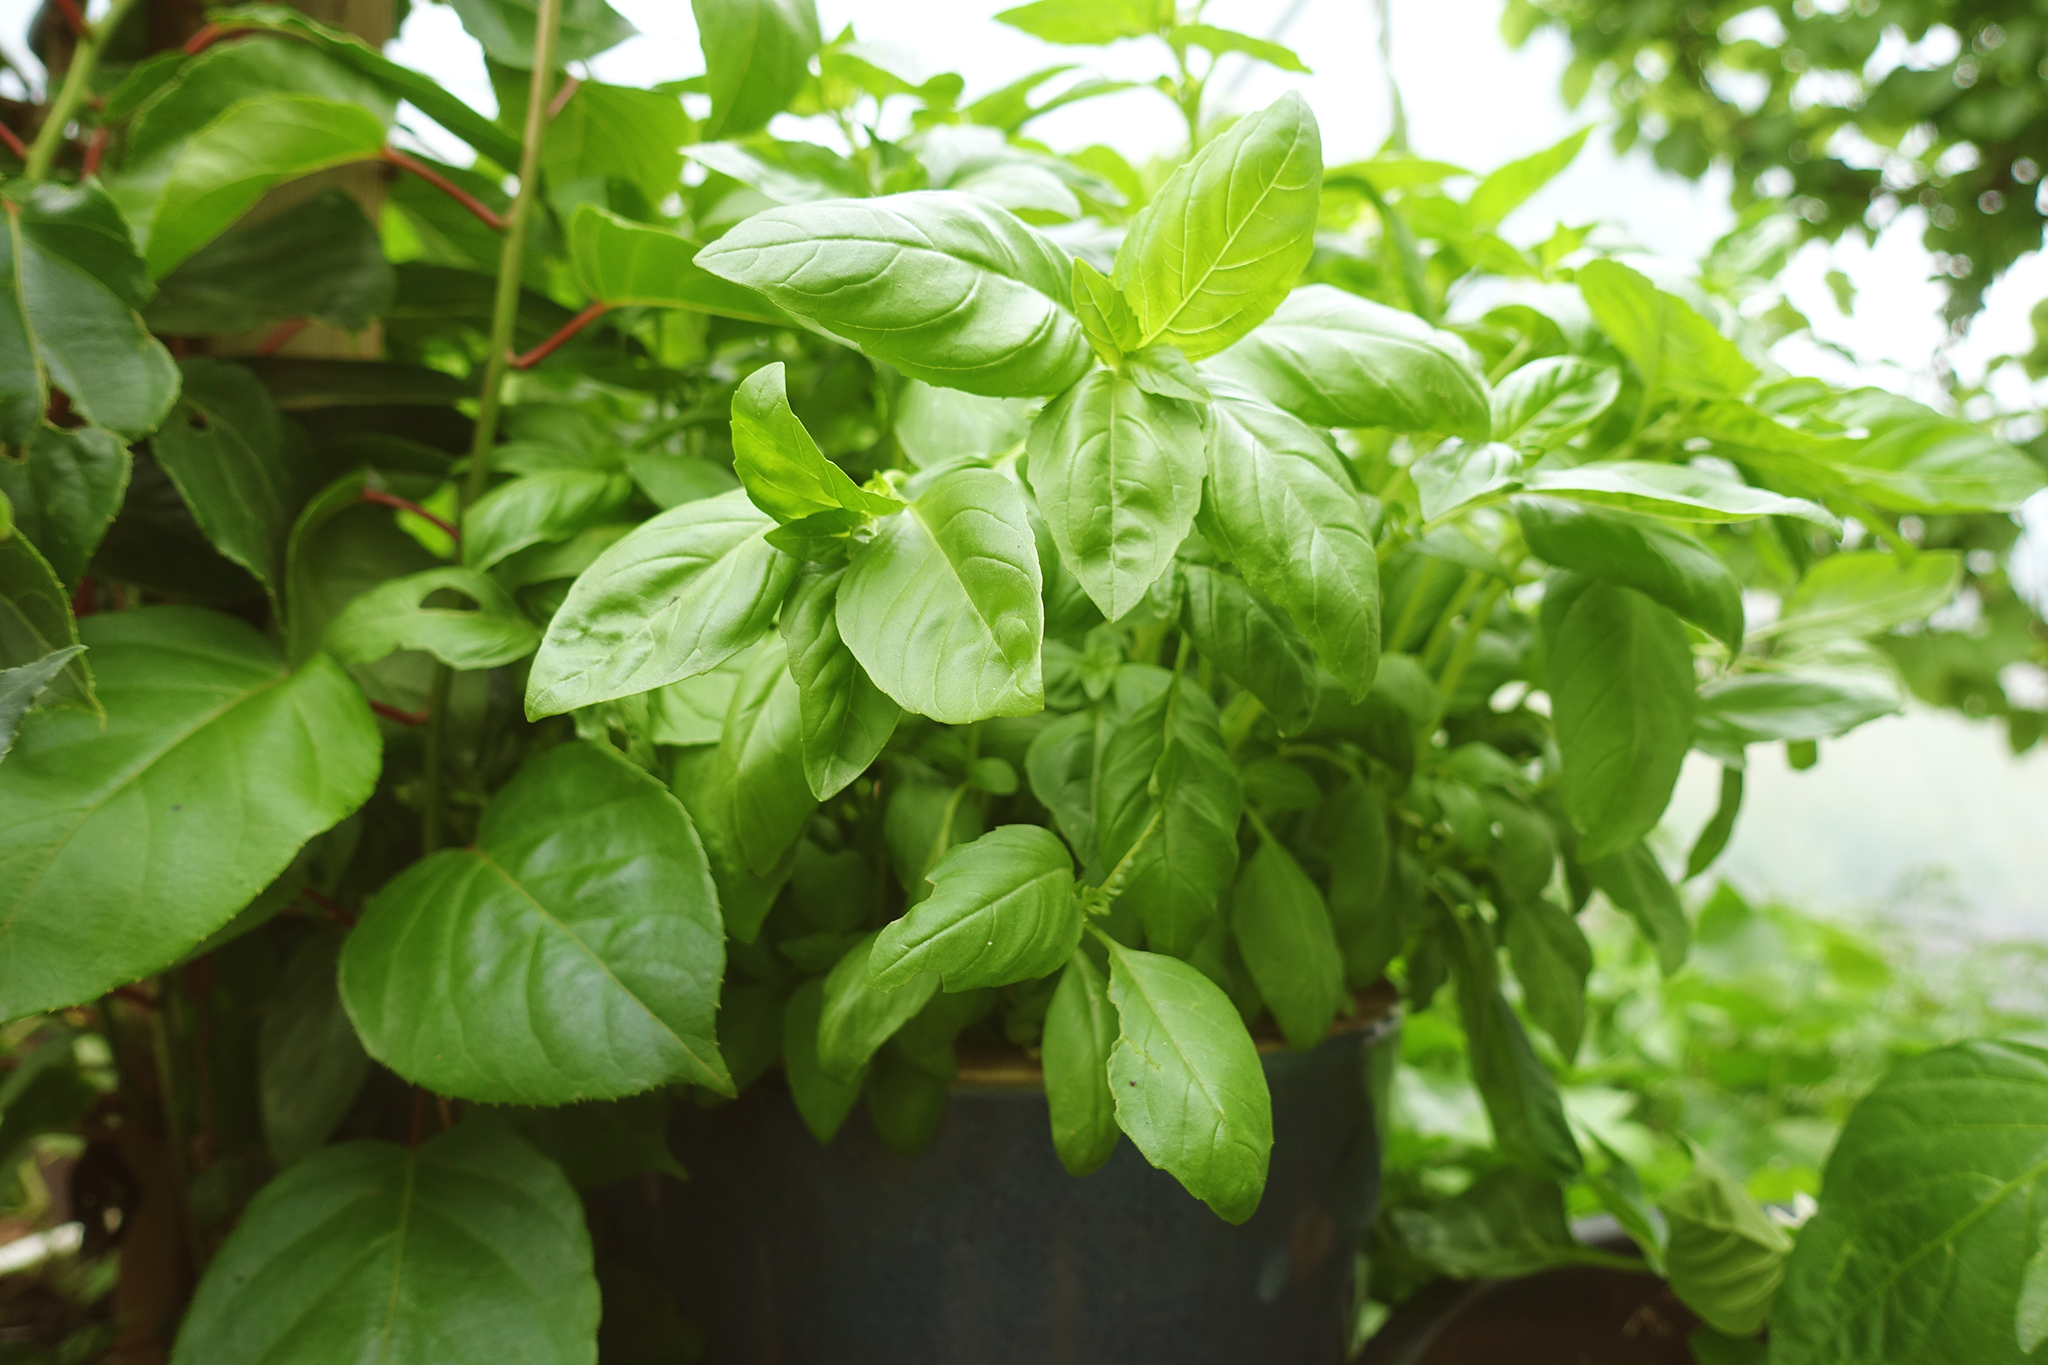 I grow basil in a pot, ready to be harvested in my greenhouse.